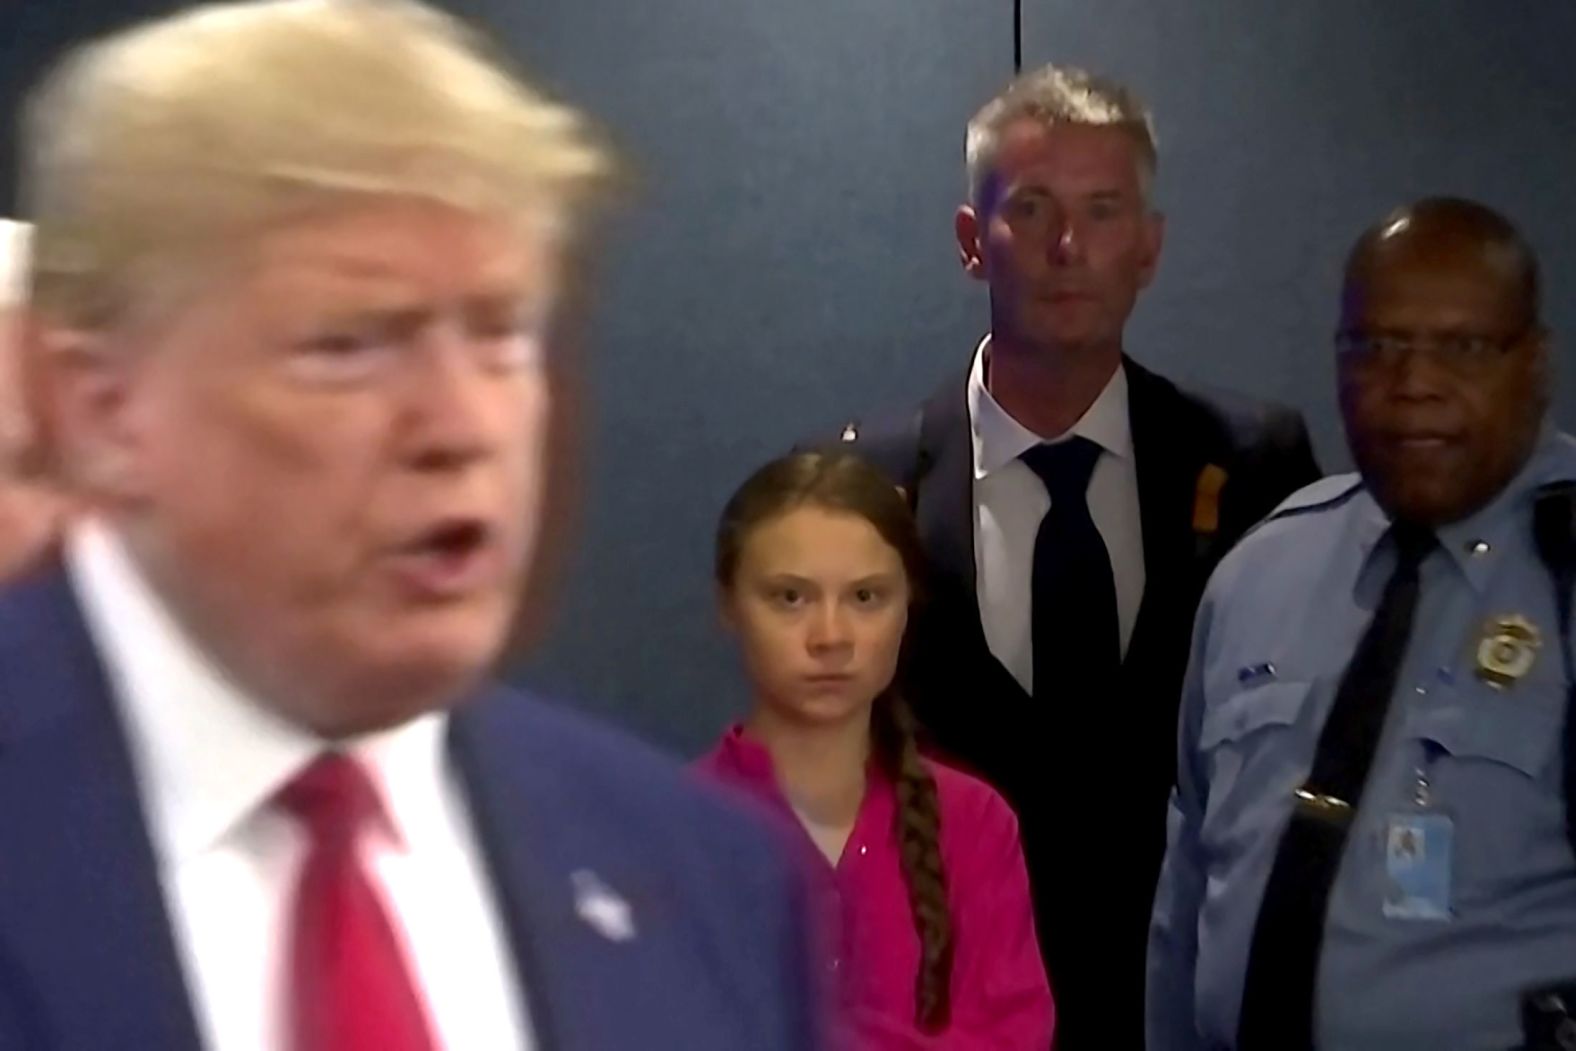 Swedish climate activist Greta Thunberg watches Trump as he enters the United Nations to speak with reporters in September 2019. Thunberg, 16, <a href="index.php?page=&url=https%3A%2F%2Fwww.cnn.com%2F2019%2F09%2F23%2Fweather%2Fgreta-thunberg-unga-climate-speech-intl%2Findex.html" target="_blank">didn't mince words</a> as she spoke to world leaders during the UN Climate Action Summit. She accused them of not doing enough to mitigate climate change: "For more than 30 years, the science has been crystal clear. How dare you continue to look away?" <a href="index.php?page=&url=https%3A%2F%2Fwww.cnn.com%2F2019%2F09%2F24%2Fpolitics%2Ftrump-greta-thunberg-climate-change-trnd%2Findex.html" target="_blank">Trump later mocked Thunberg on Twitter.</a>